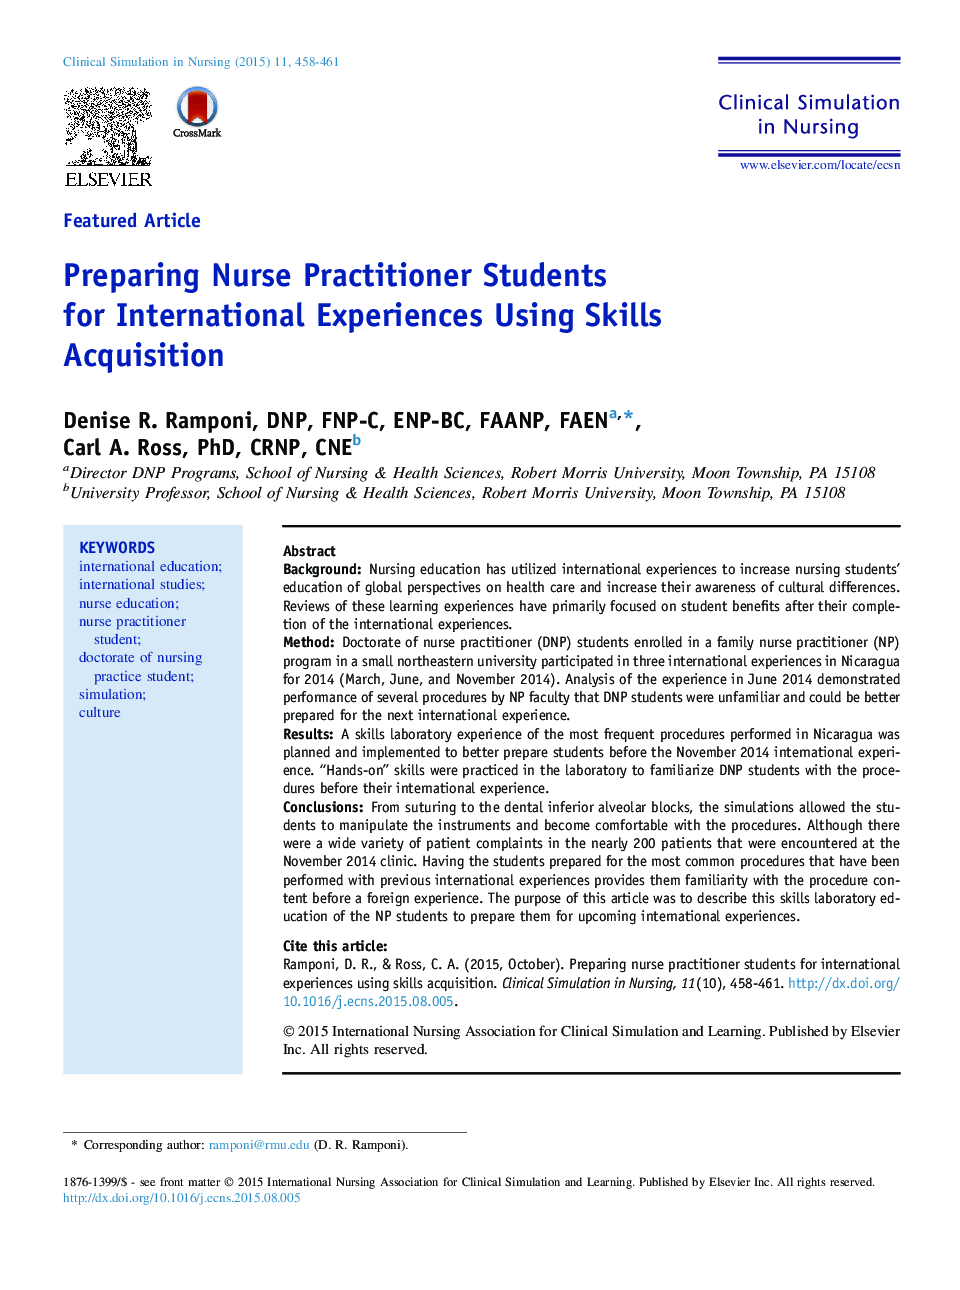 Preparing Nurse Practitioner Students for International Experiences Using Skills Acquisition